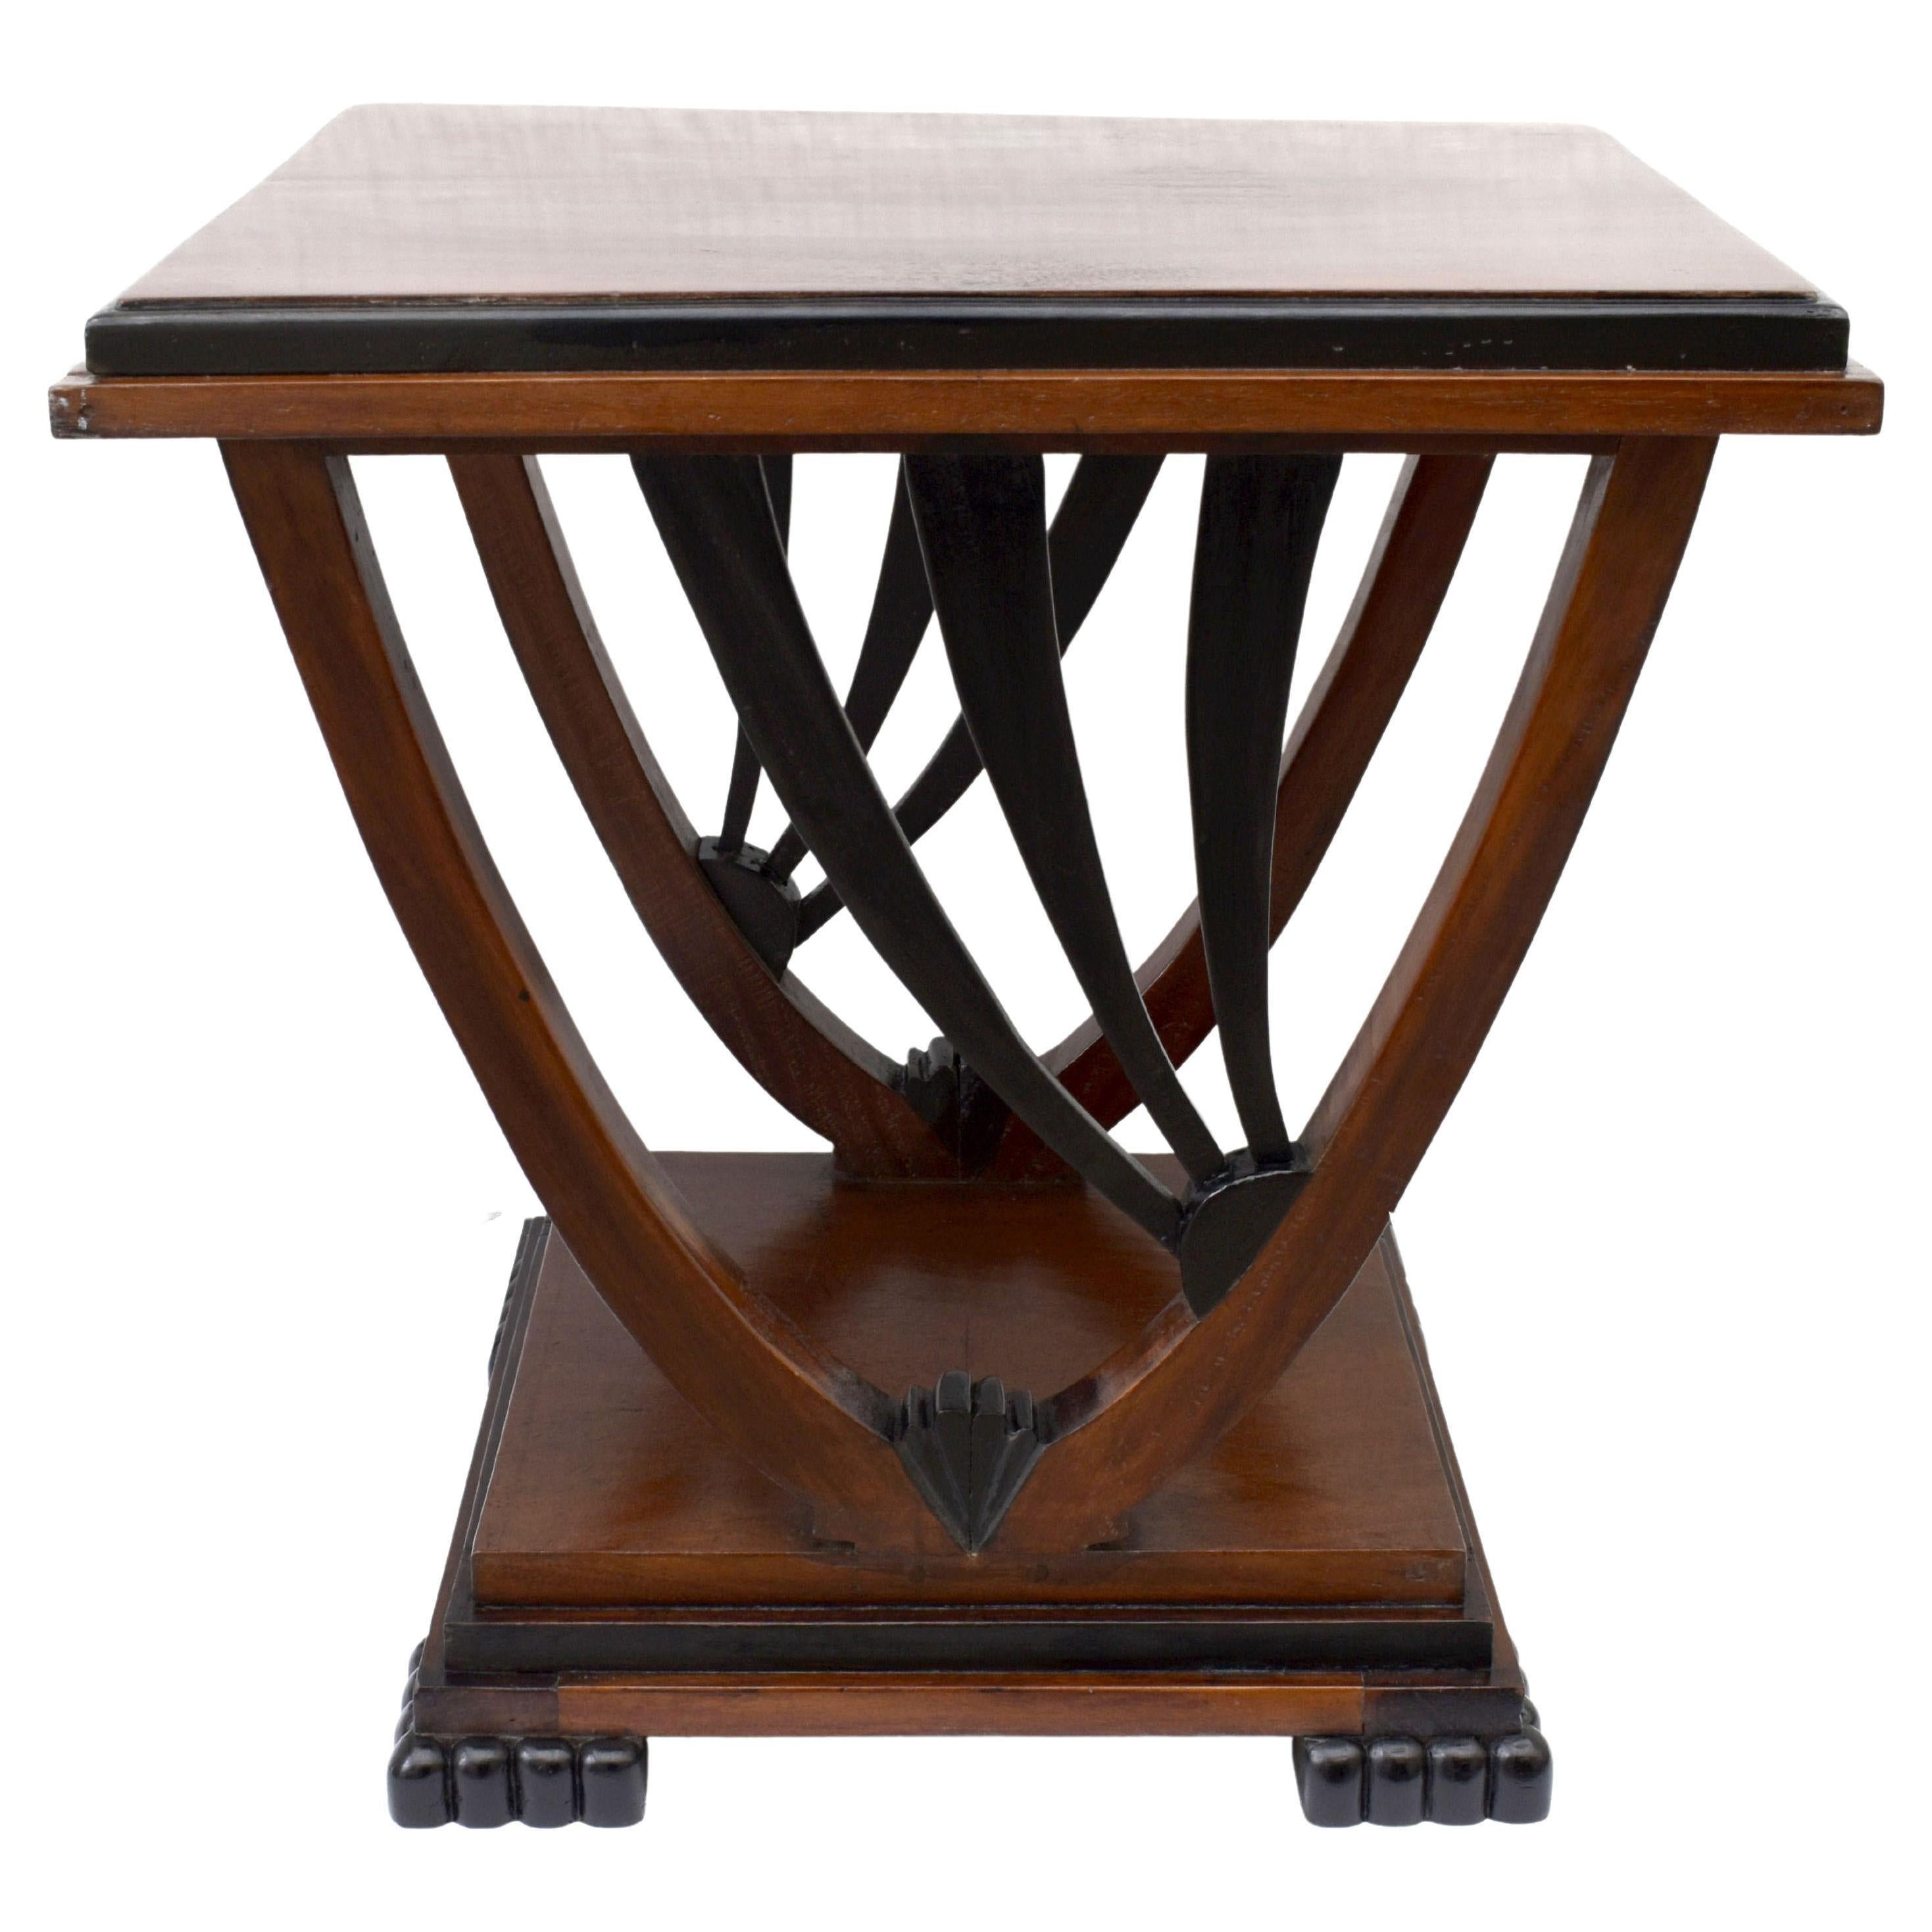 For your consideration is this iconic Art Deco occasional table made from solid Mahogany with ebonized accents. Made in the 1930s and most likely English in origin, this lovely piece has all the hallmarks of Deco design we have come to admire. Very